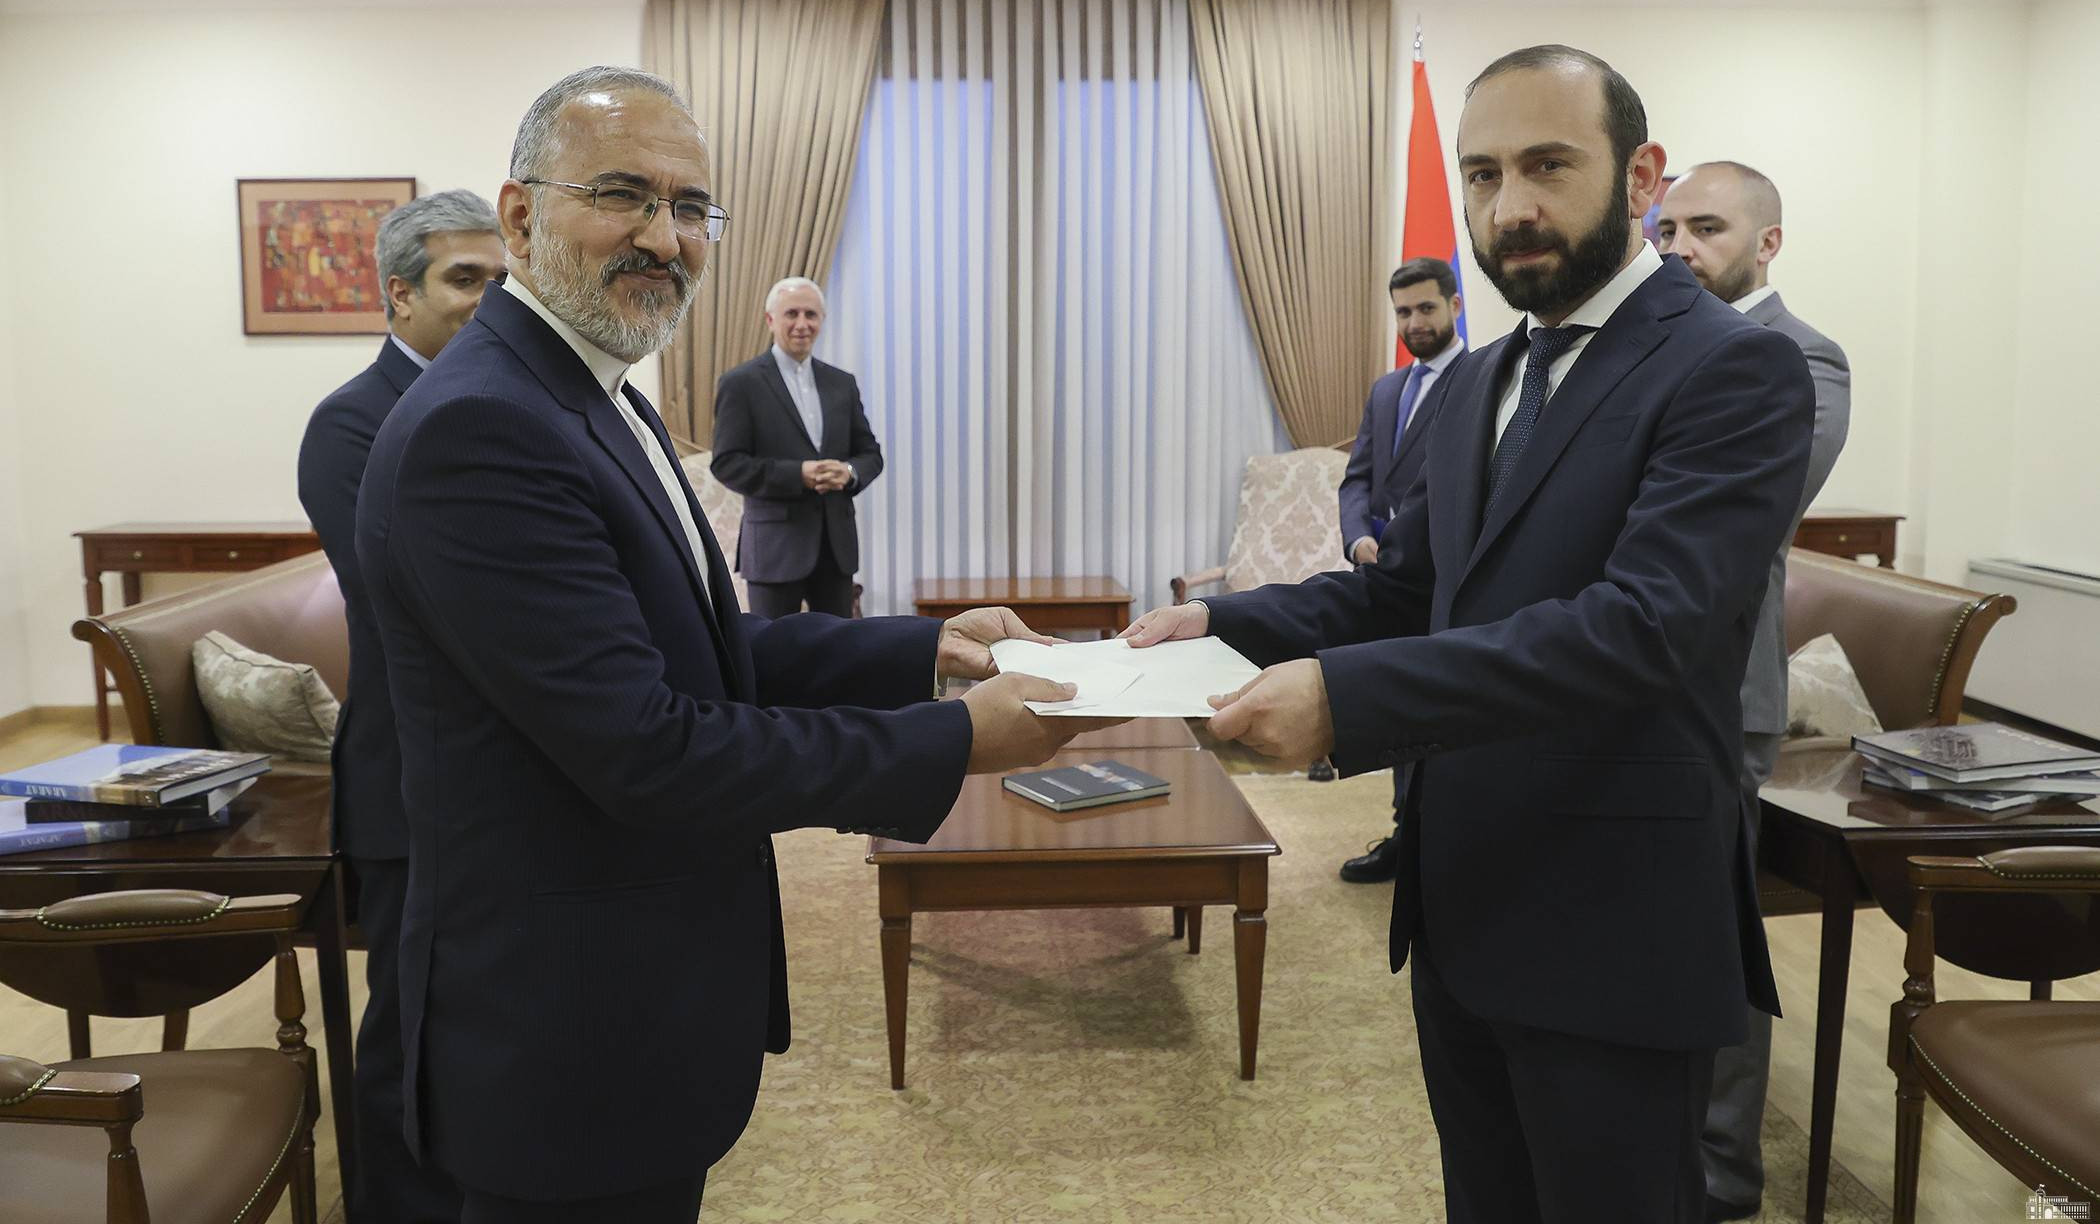 Foreign Minister of Armenia Ararat Mirzoyan received Ambassador of Iran to Armenia and newly appointed Consul General of Iran in Armenia